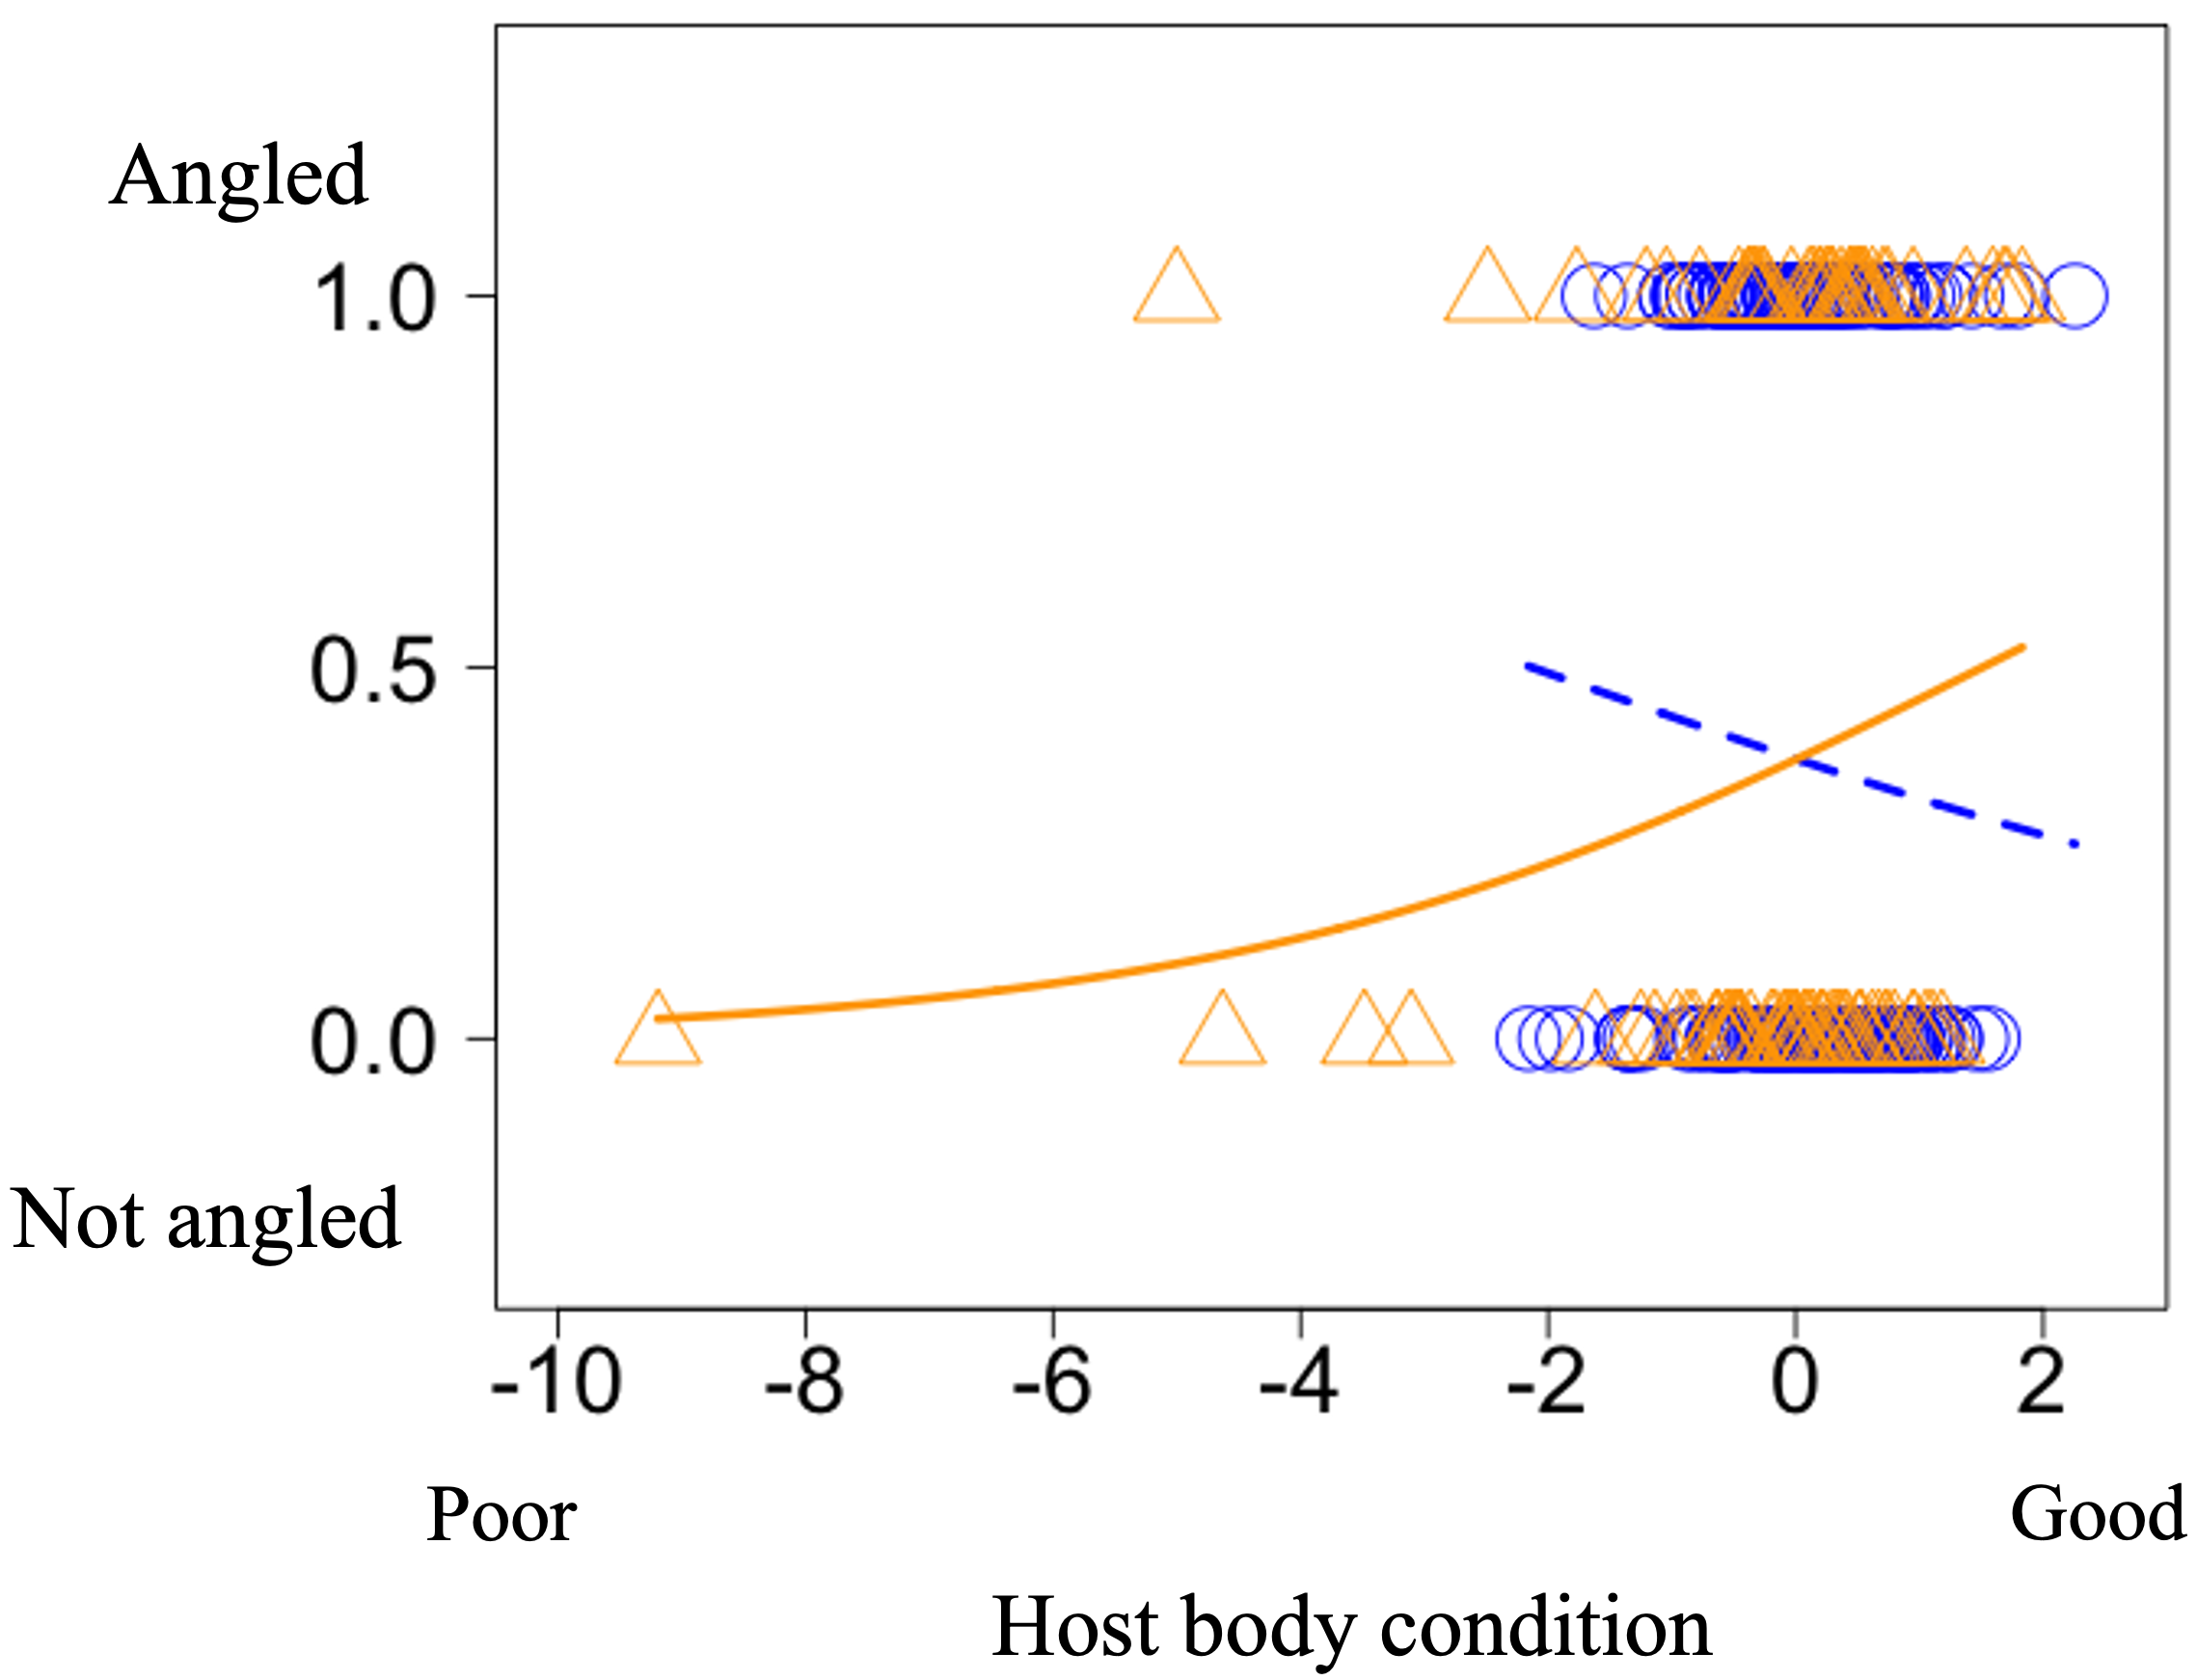 When infected by parasites (orange triangles), whitespotted char with high body condition are more likely to be caught by angling (solid orange line). Among uninfected fish (blue circles), those with a lower body condition are more likely to be caught by angling (broken blue line) (Ryota Hasegawa).